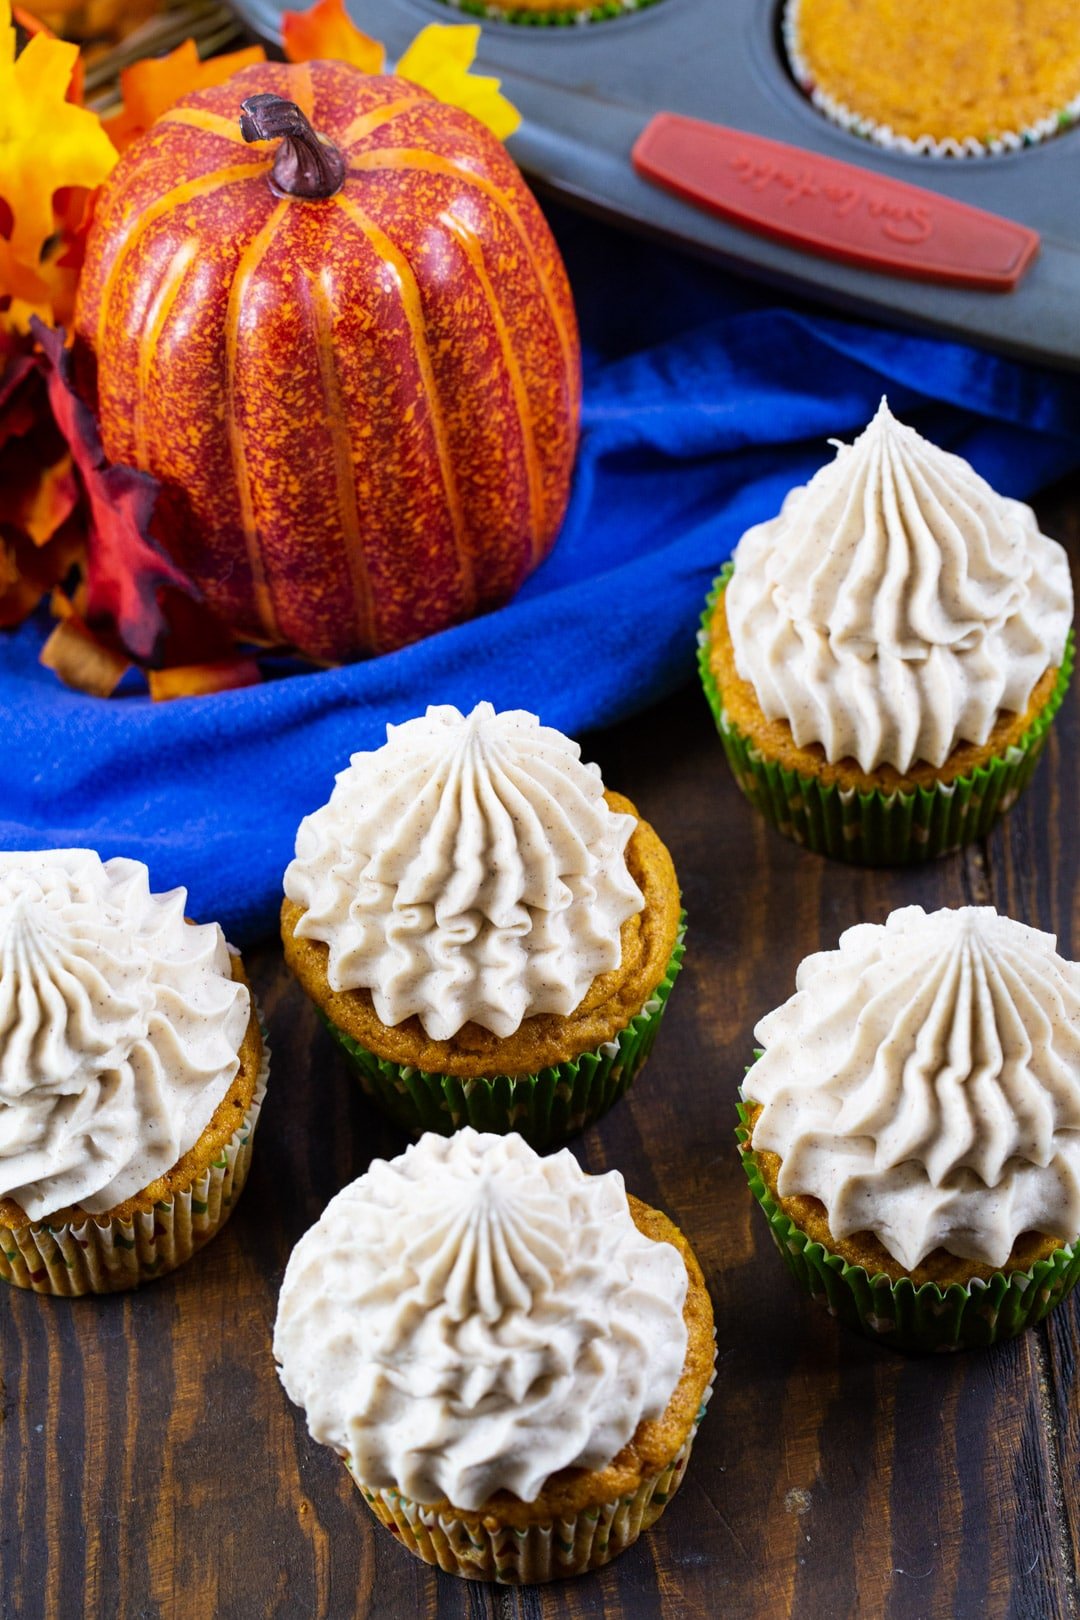 Pumpkin Cupcakes with Cinnamon Cream Cheese Frosting on tabletop with pumpkin.